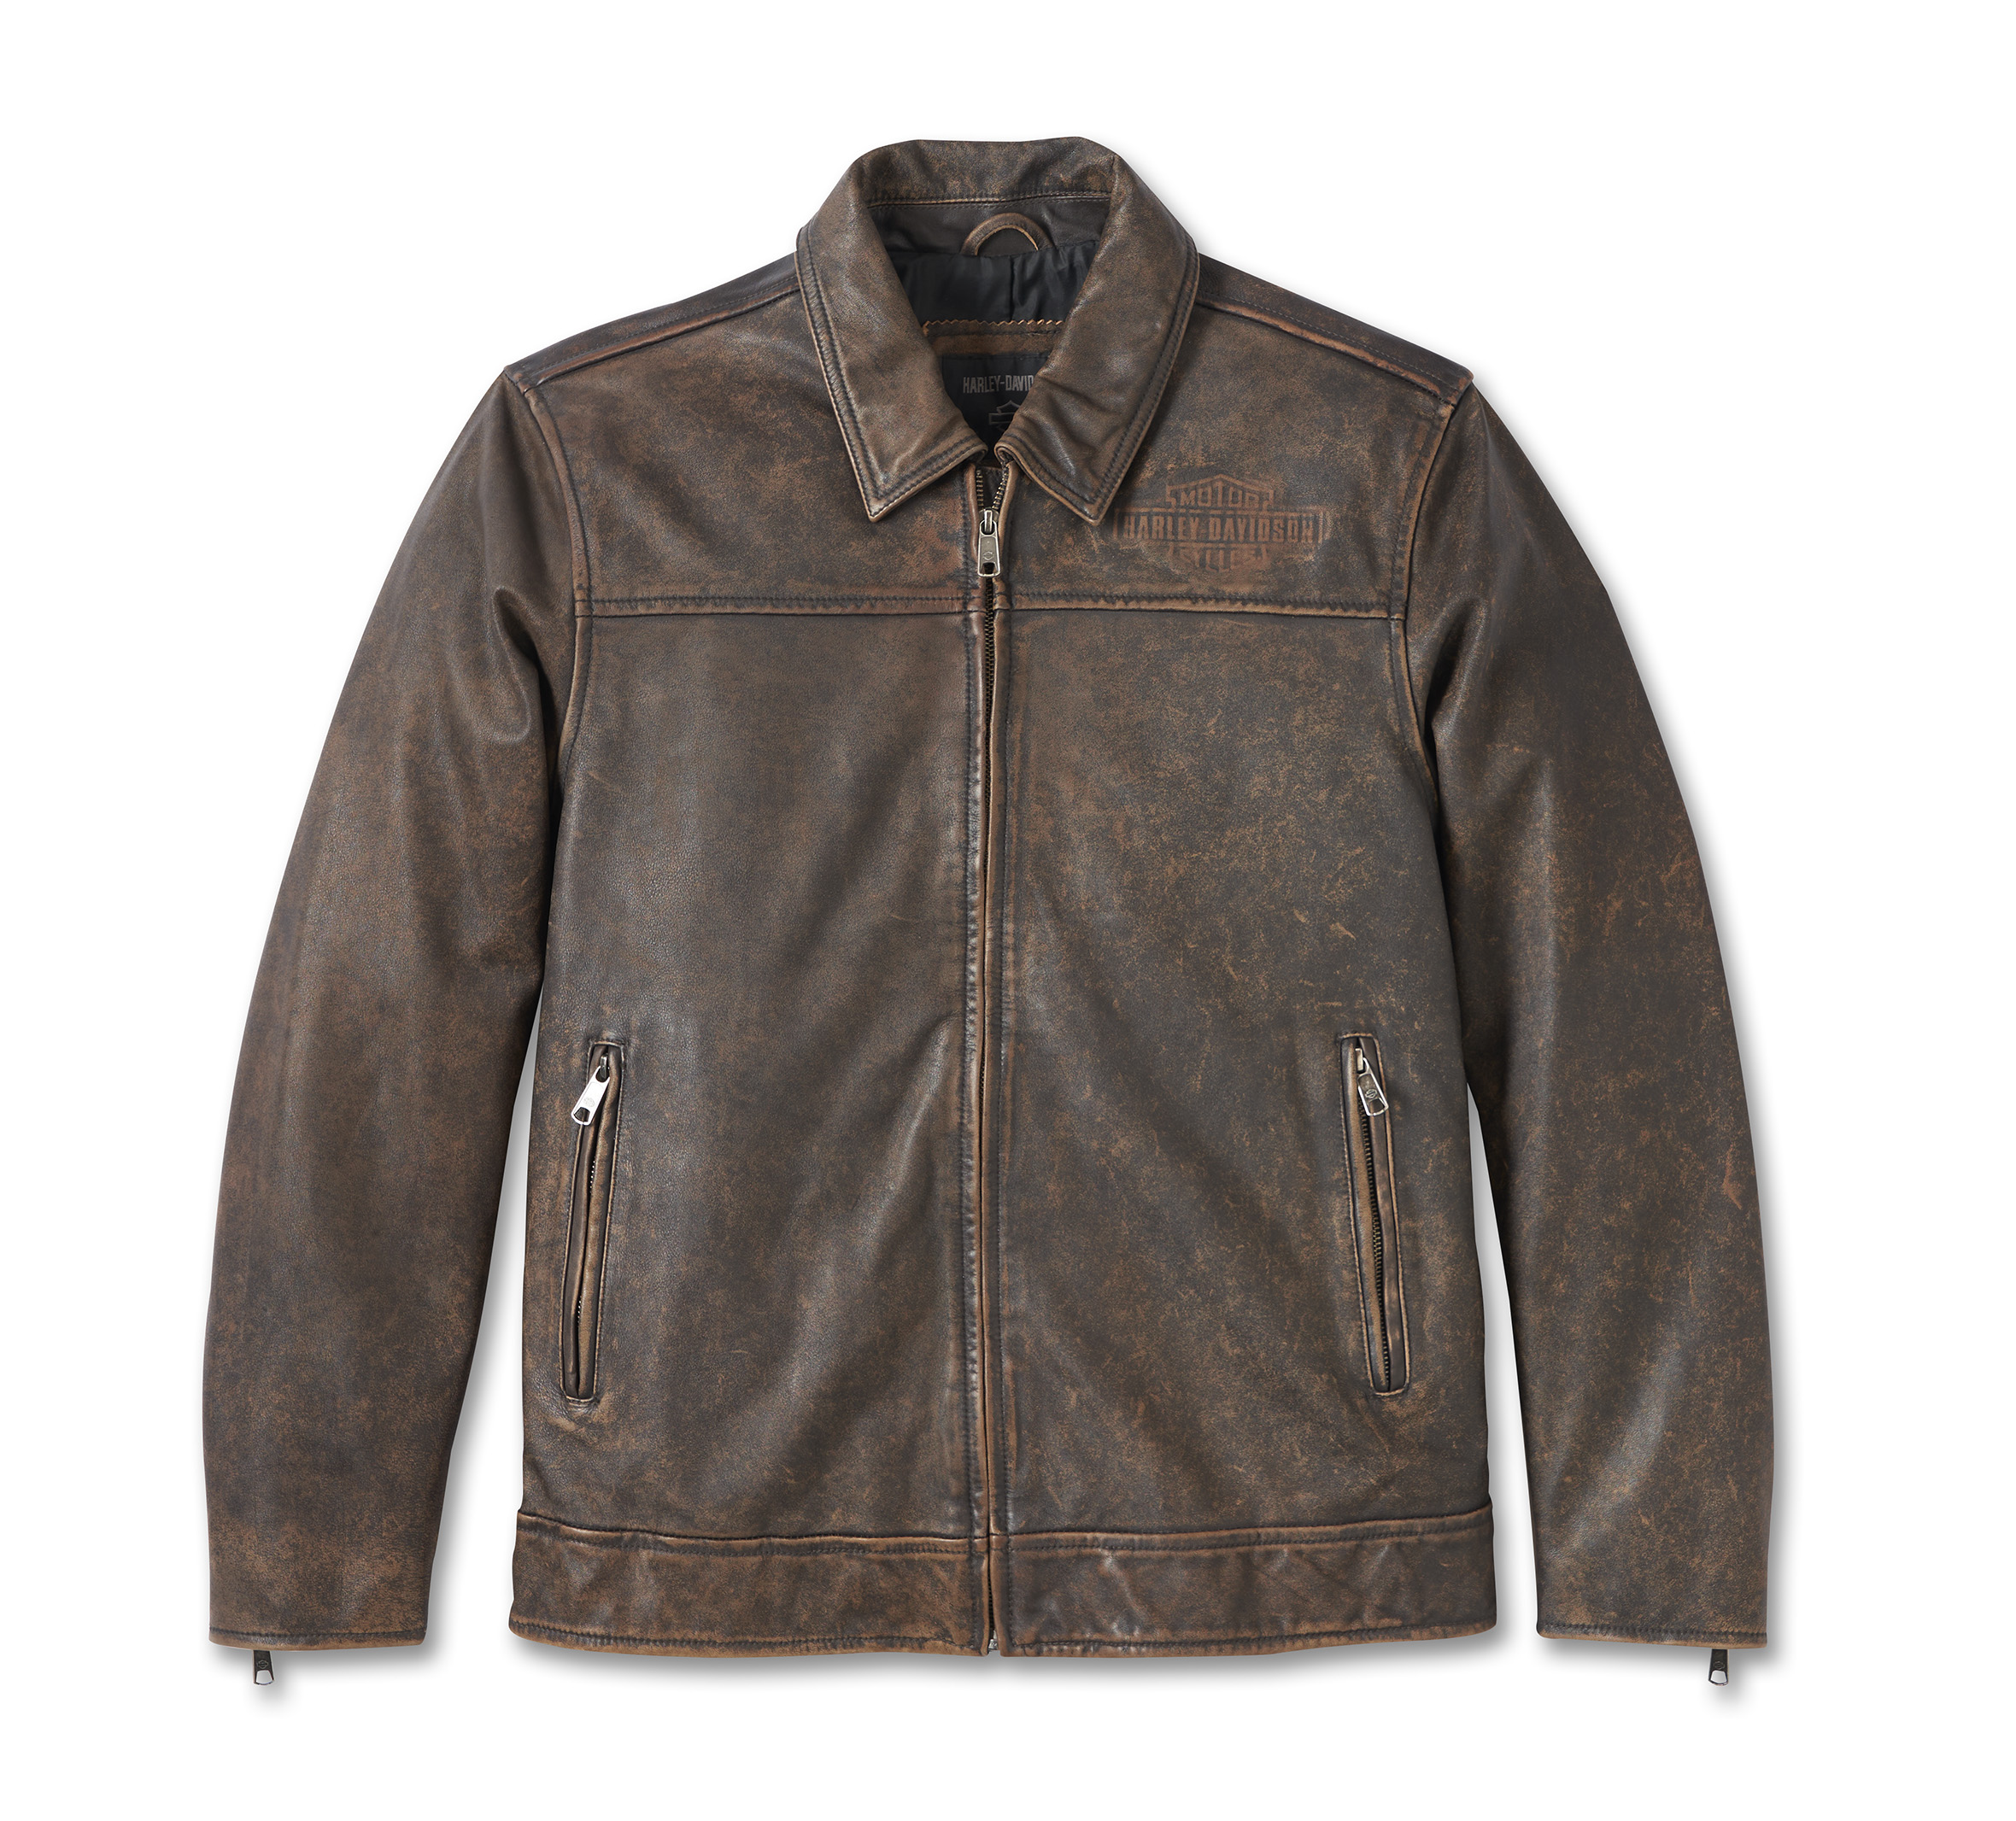 Buy Leather Retail Brown Biker Jacket for Men(LRM38BR) at Amazon.in